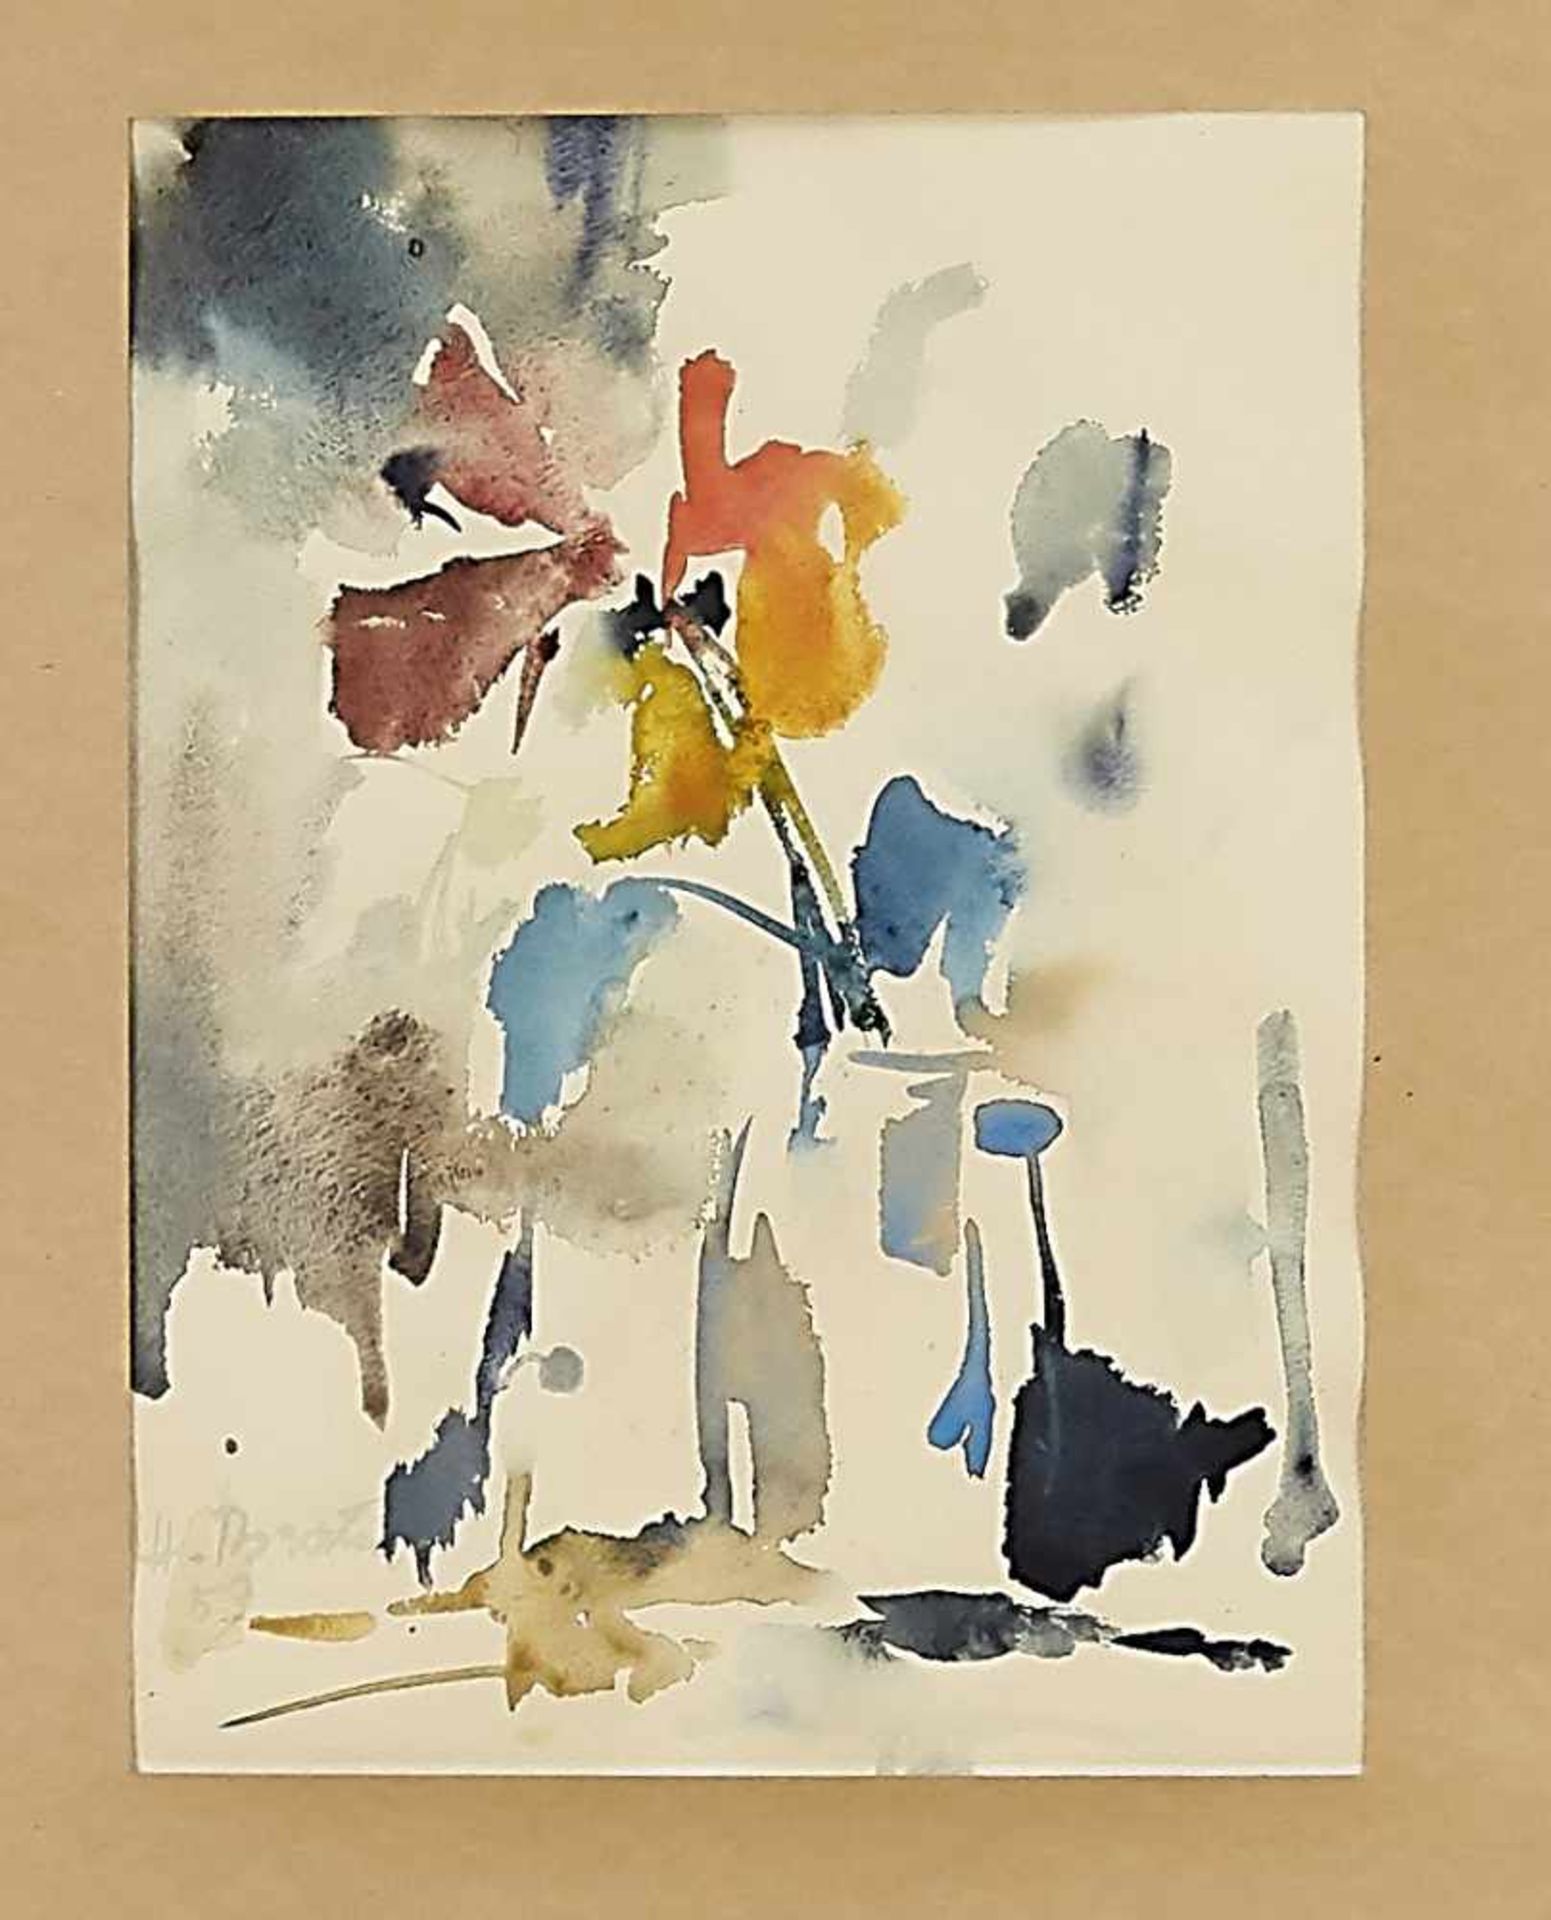 H. Braun, German Painter Mid-20th Century, expressive floral still life, watercolor on